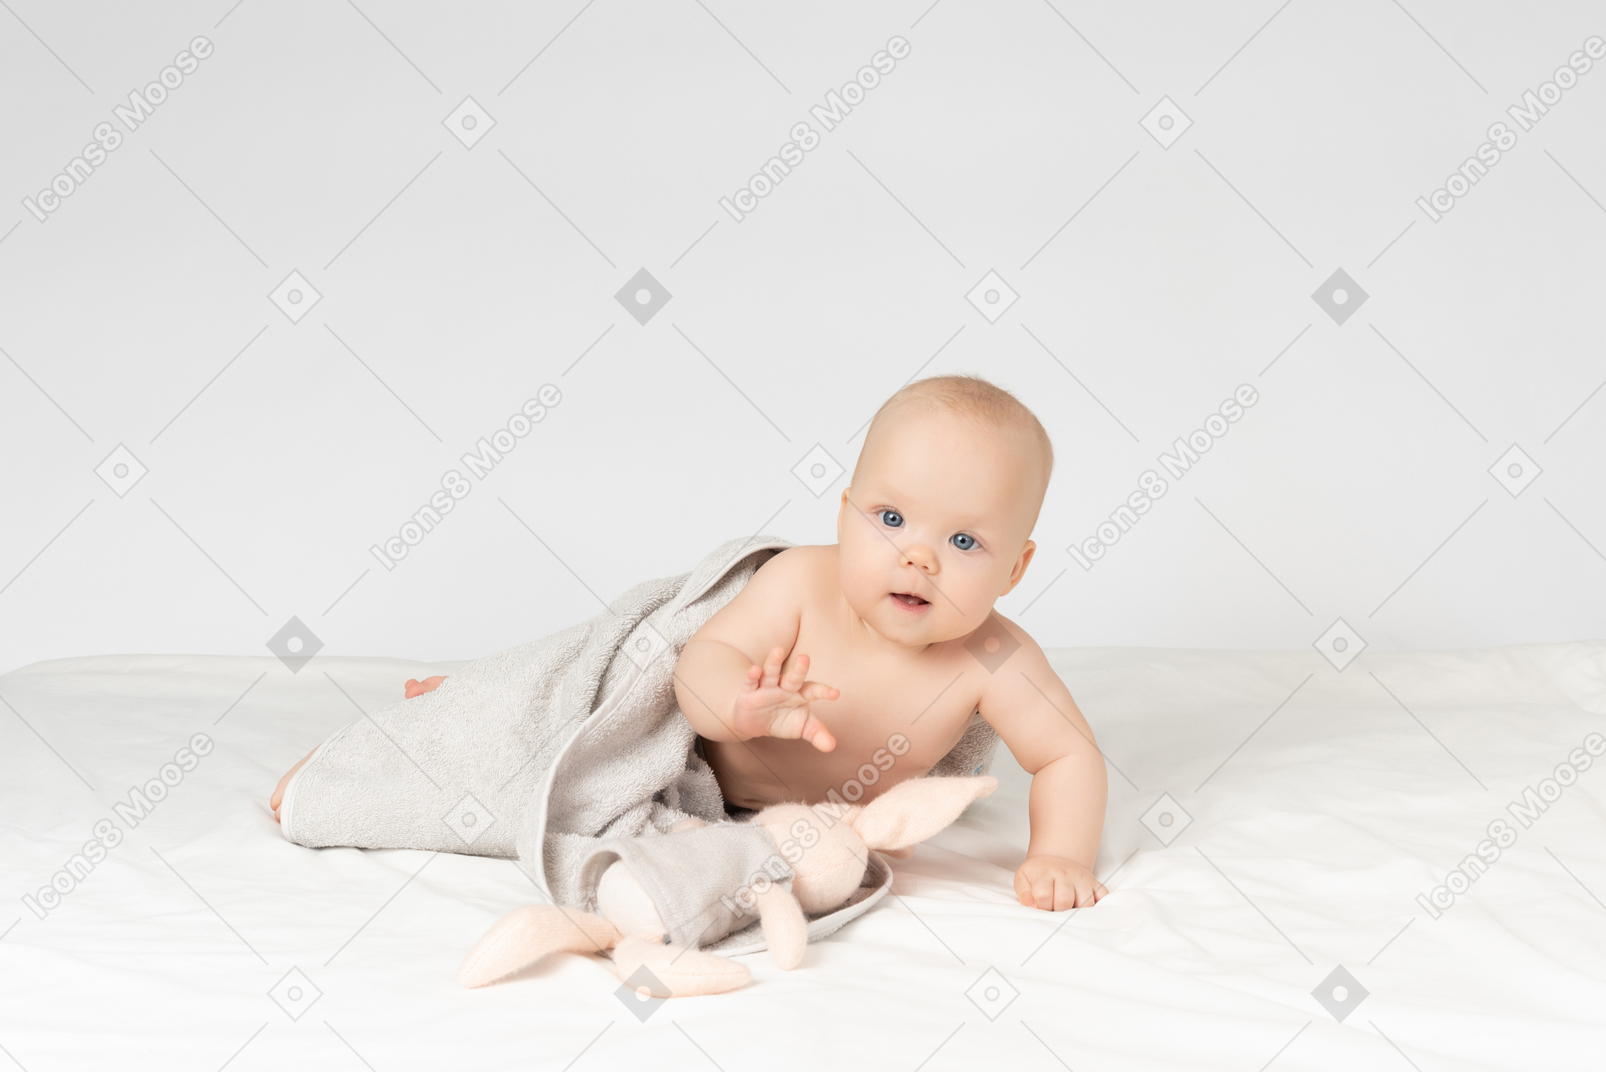 Baby girl covered in towel and holding a toy